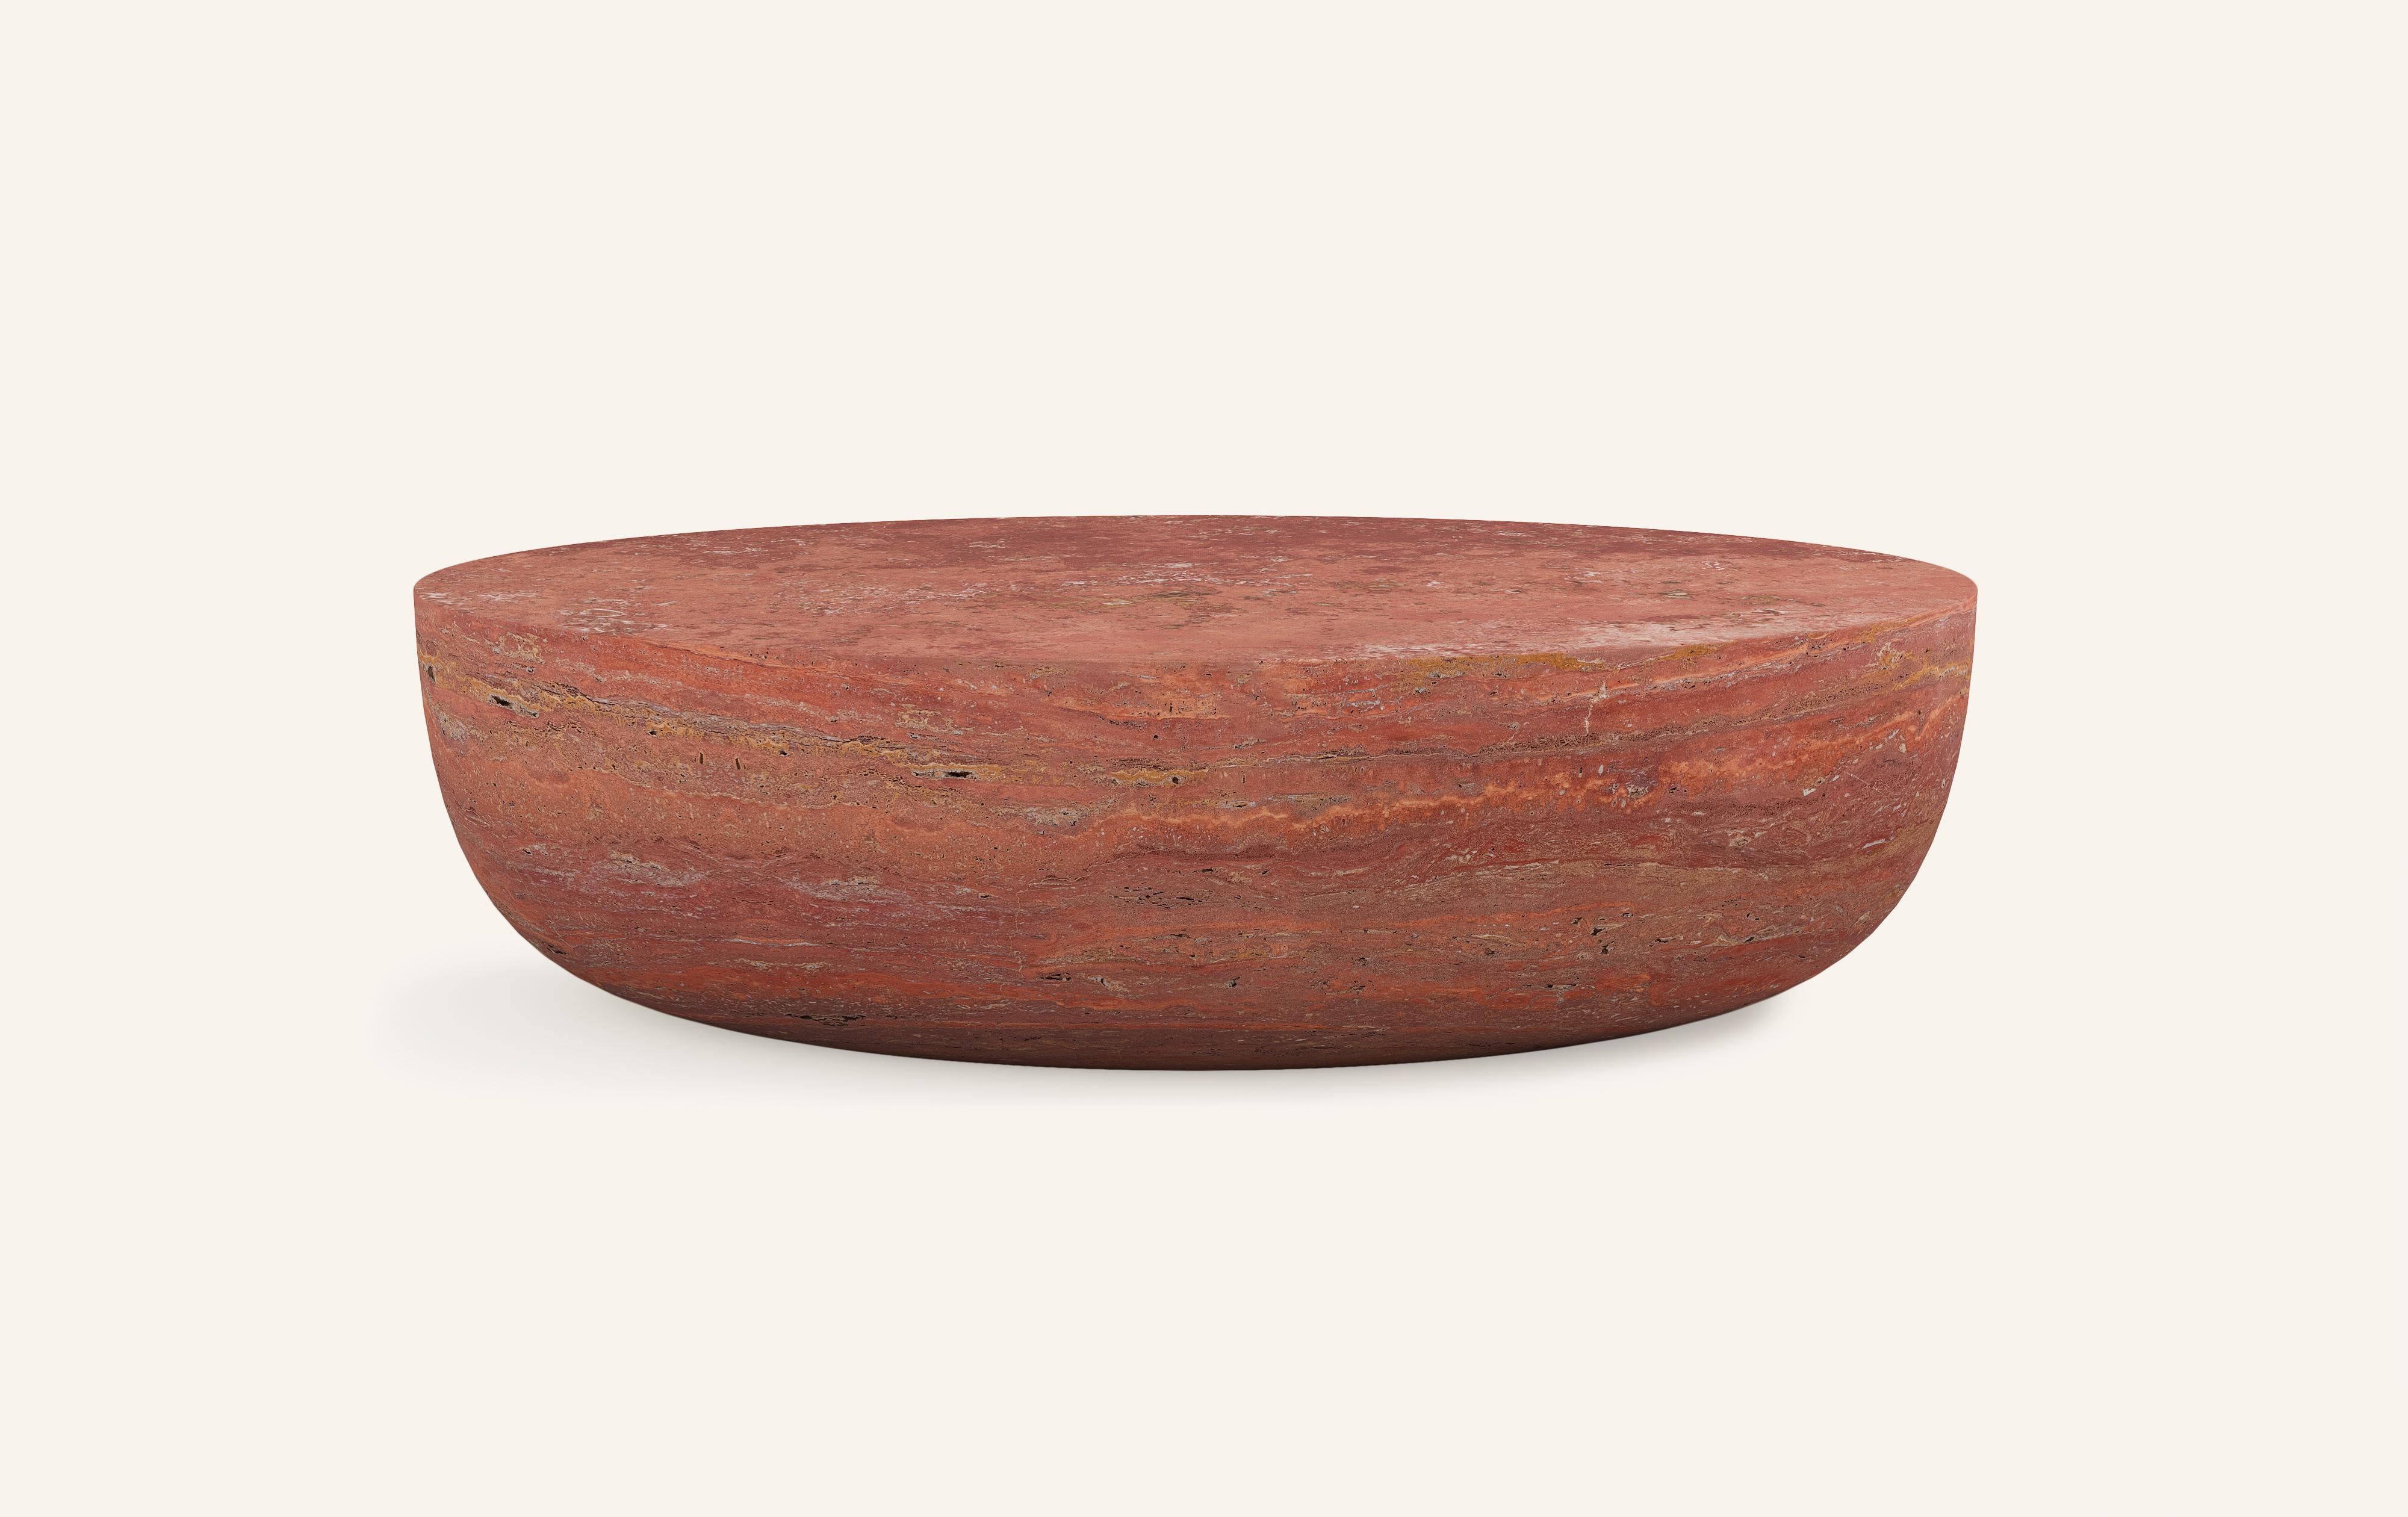 A SLICE OF A ’SPHERE’ OR 'SFERA' IN ITALIAN BALANCES A FLAT SURFACE ATOP AND ROBUST MONOLITH FORM. WITH A BASE SOFTENED BY A CURVED PROFILE, SFERA IS SOFT AND EARTHY IN ITS AVAILABLE STONE SELECTIONS.

DIMENSIONS: 
48”L x 36”W x 16”H: 
- SOLID BLOCK